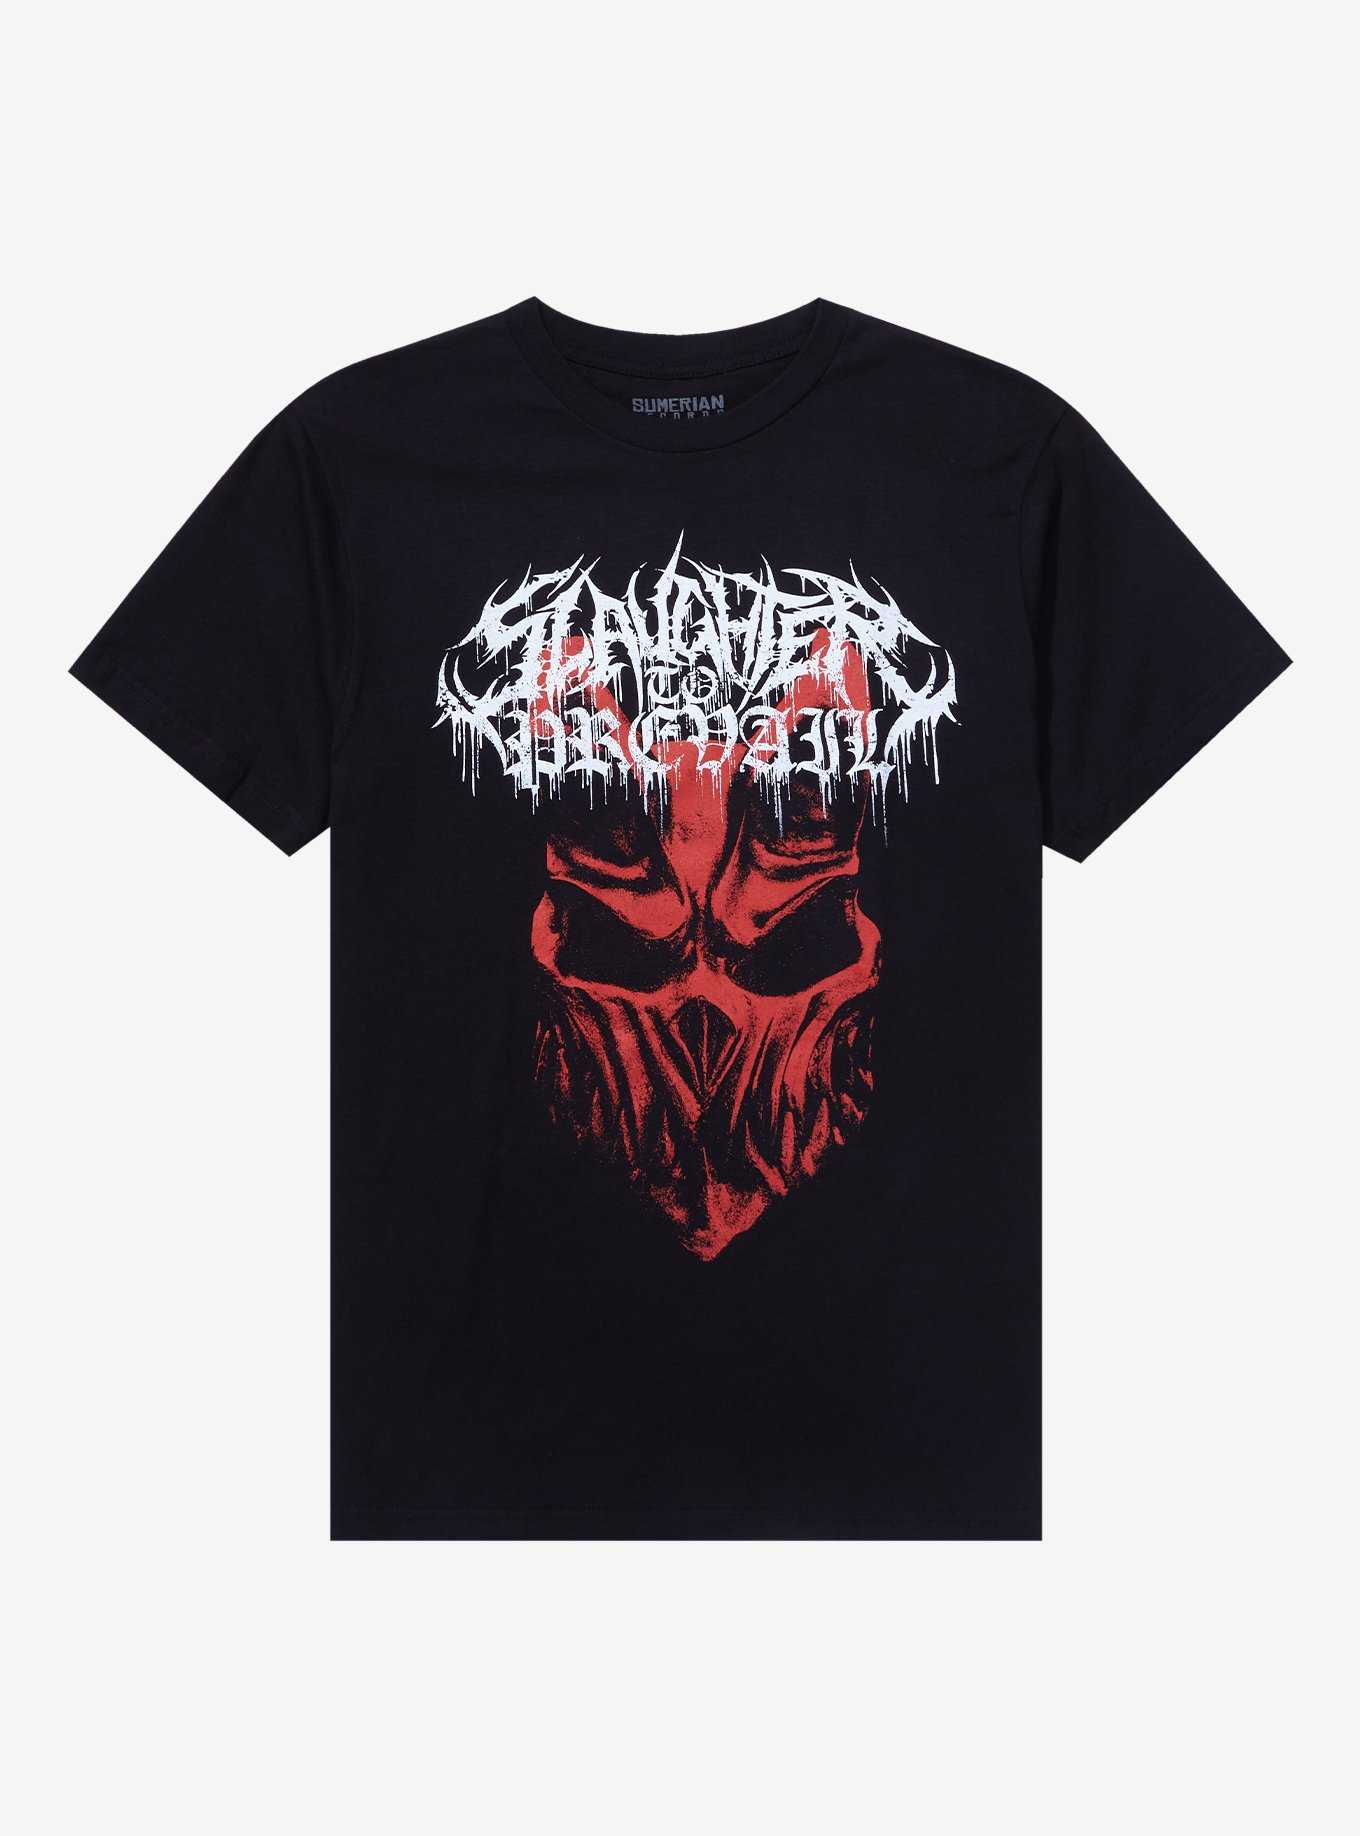 Slaughter To Prevail Kid Of Darkness Skull T-Shirt, , hi-res